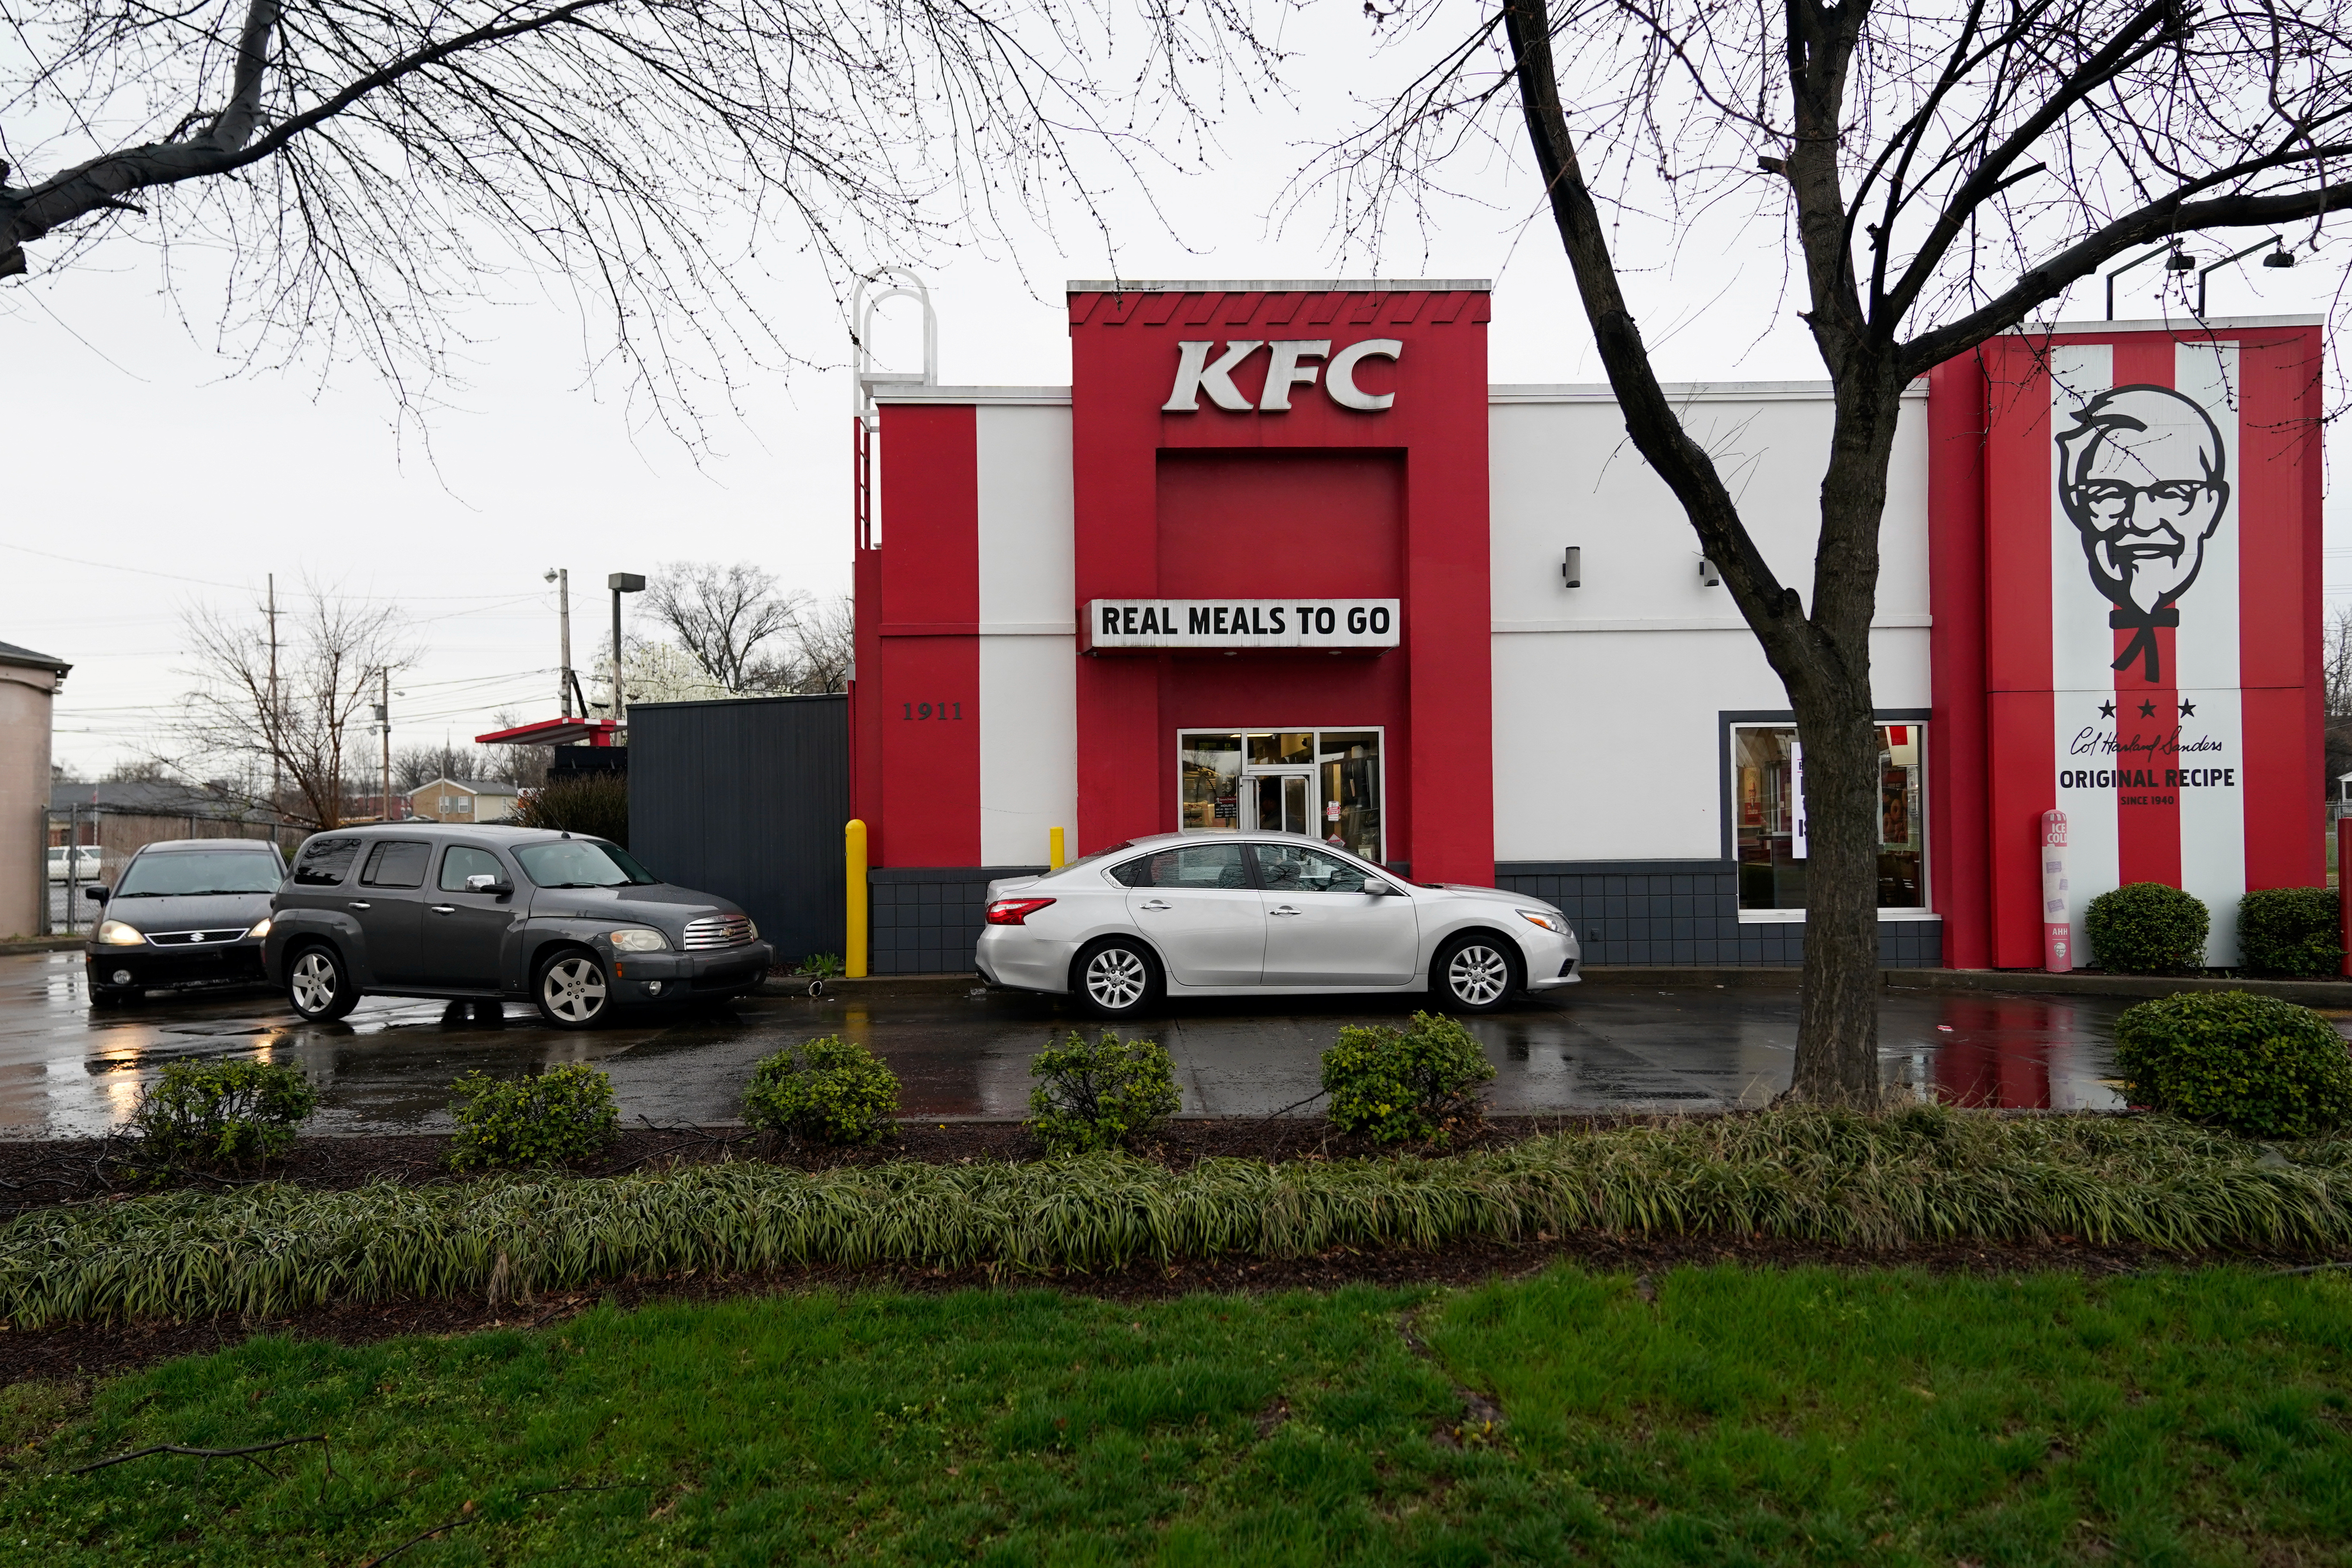 FILE PHOTO - Vehicles line up around Kentucky Fried Chicken after a state mandated carry-out only policy went into effect in order to slow the spread of the novel coronavirus (COVID-19) in Louisville